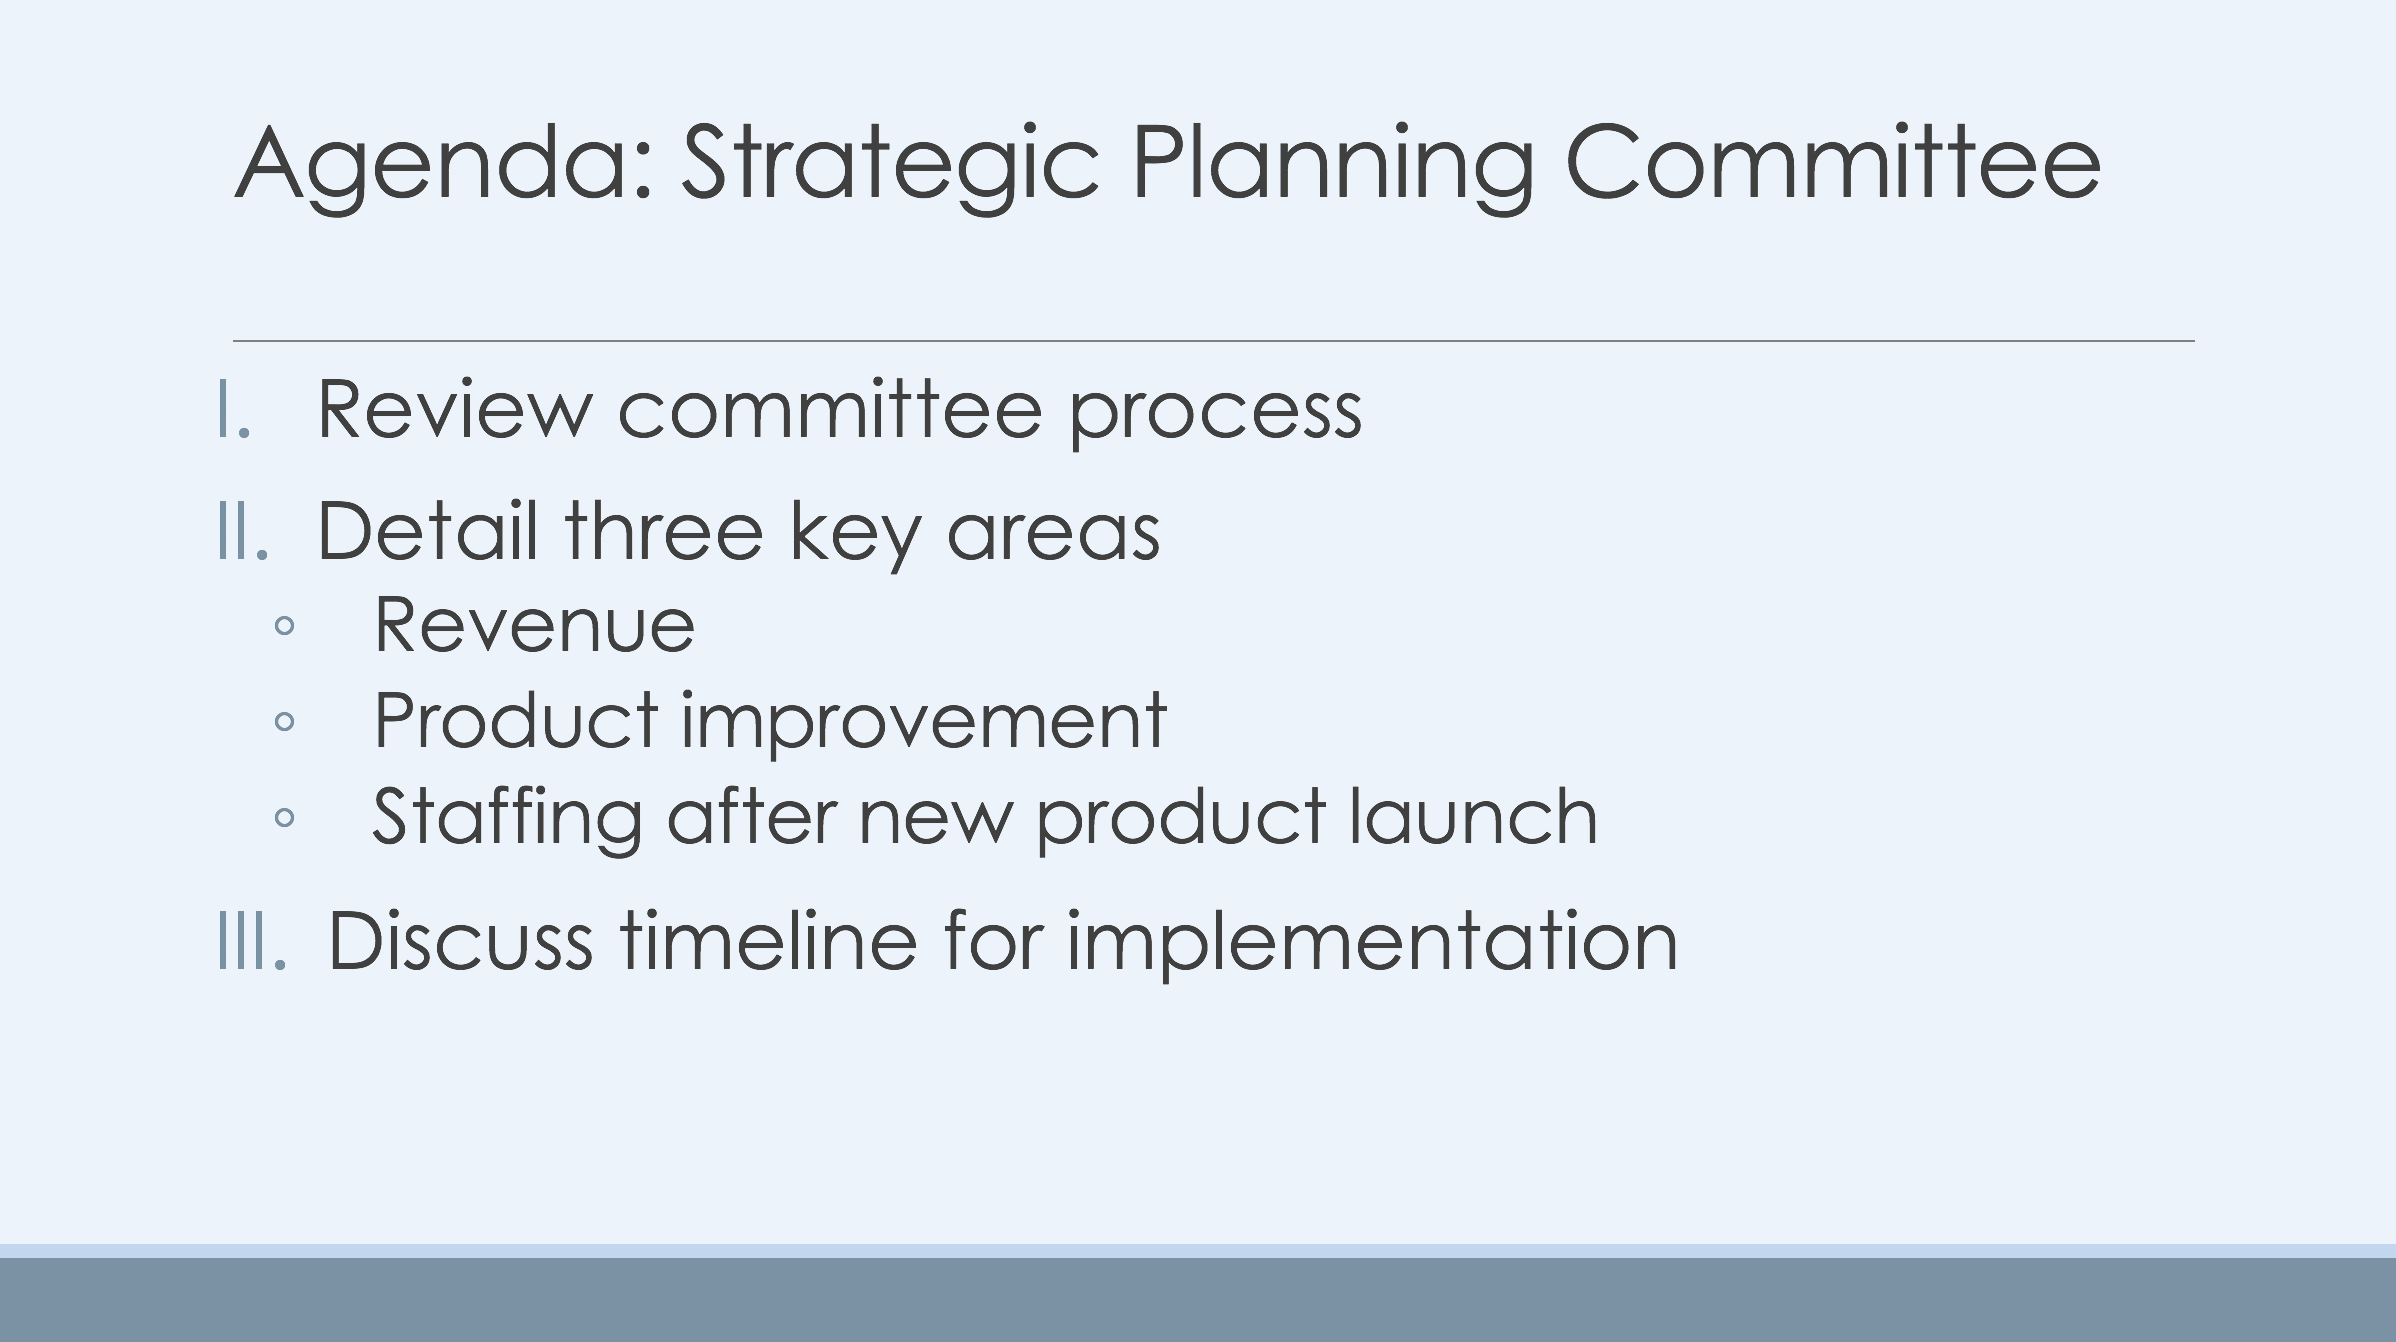 A Sample Outline Slide from a Presentation. The slide has a heading and a numbered list. The heading reads Agenda: Strategic Planning Committee. The numbered list has three items. The first item reads Review Committee process. The second item reads Detail three key areas of focus. The second item then has three sub points: the first sub-point reads Revenue. The second sub-point reads product improvement. The third sub-point reads staffing after new product launch. The third item of the top-level list reads discuss timeline for implementation.